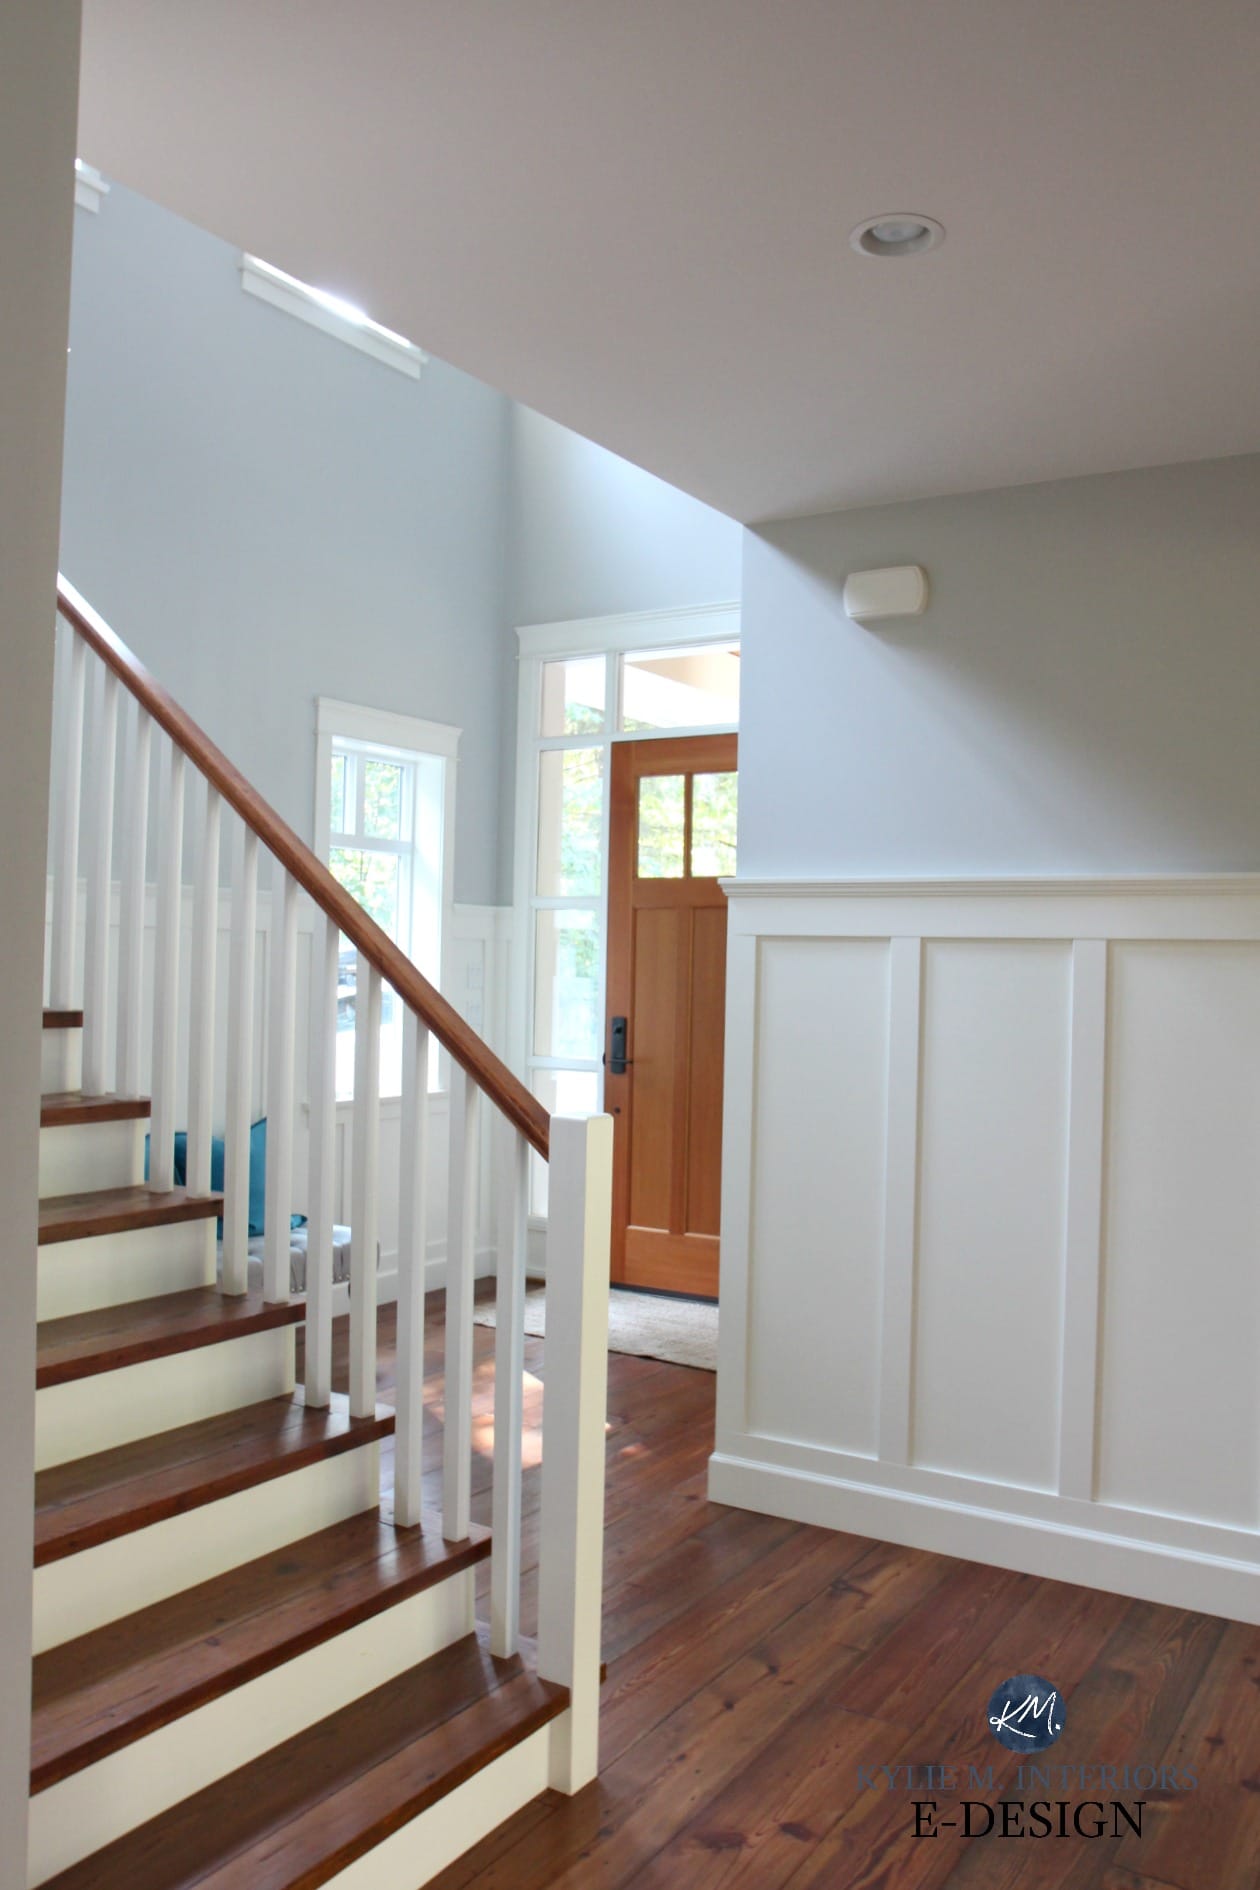 Entryway, stairwell, reclaimed pine wood flooring, treads, white railing, white wainscoting. Benjamin Moore Cloud White and Gray Owl. Kylie M Interiors Edesign, online paint colour and decorating blog